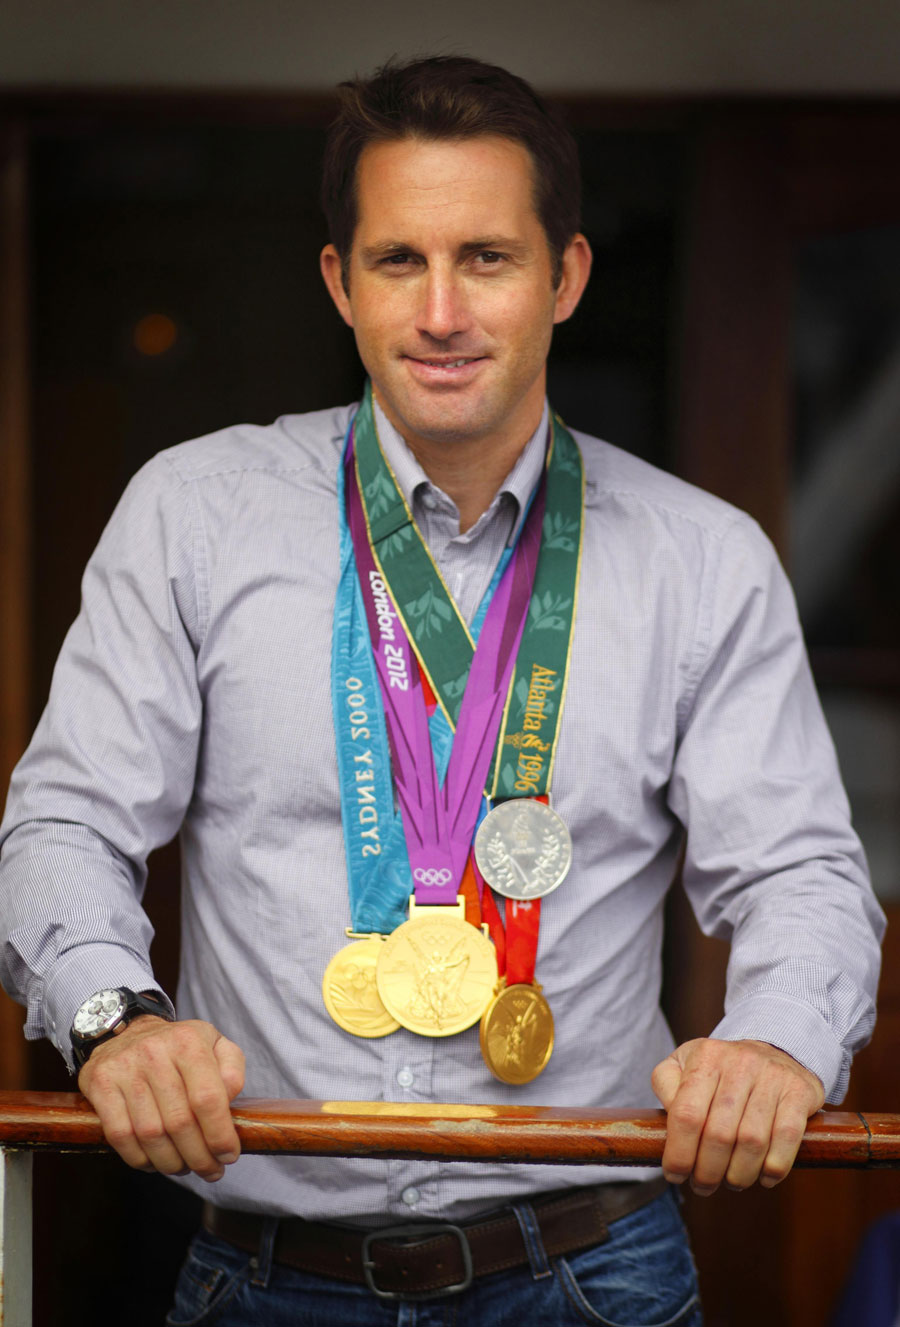 Ben Ainslie shows off his Olympic medals